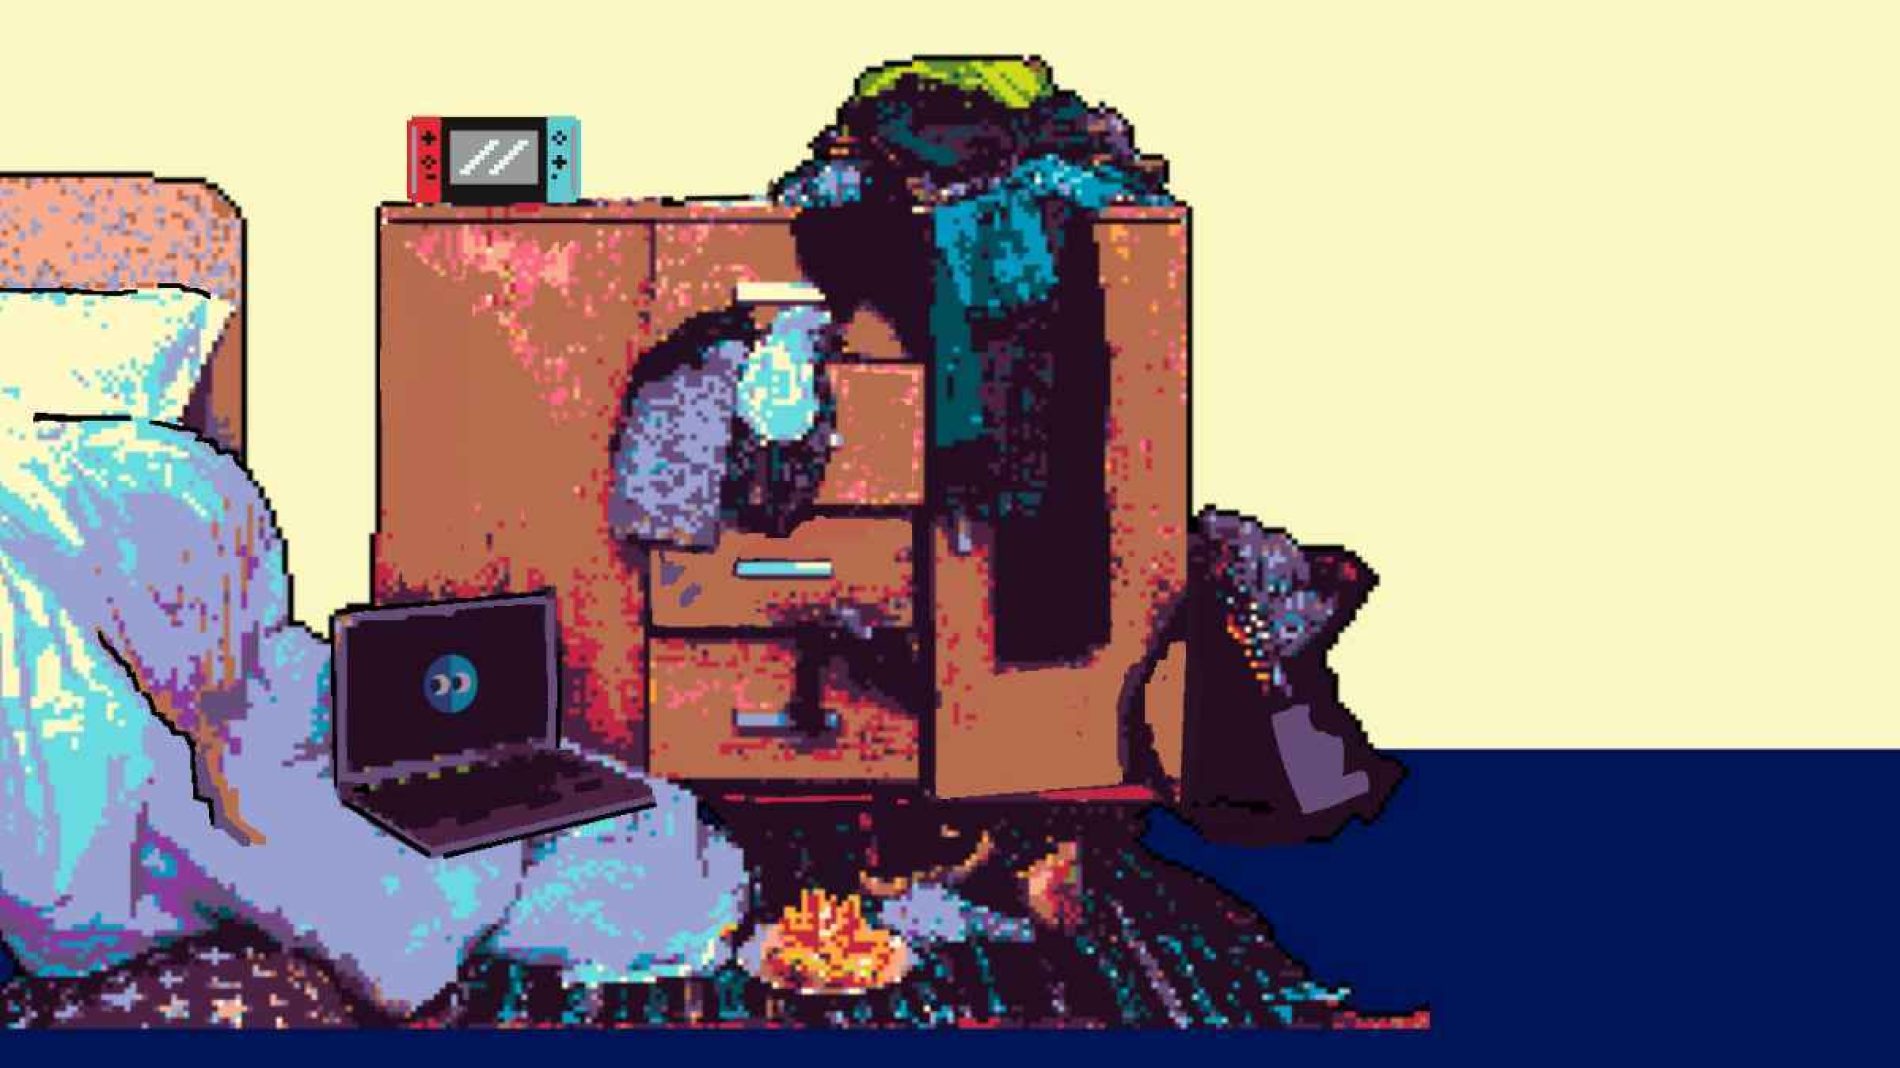 pixel art illustration of bedroom dresser with clothes on the floor.